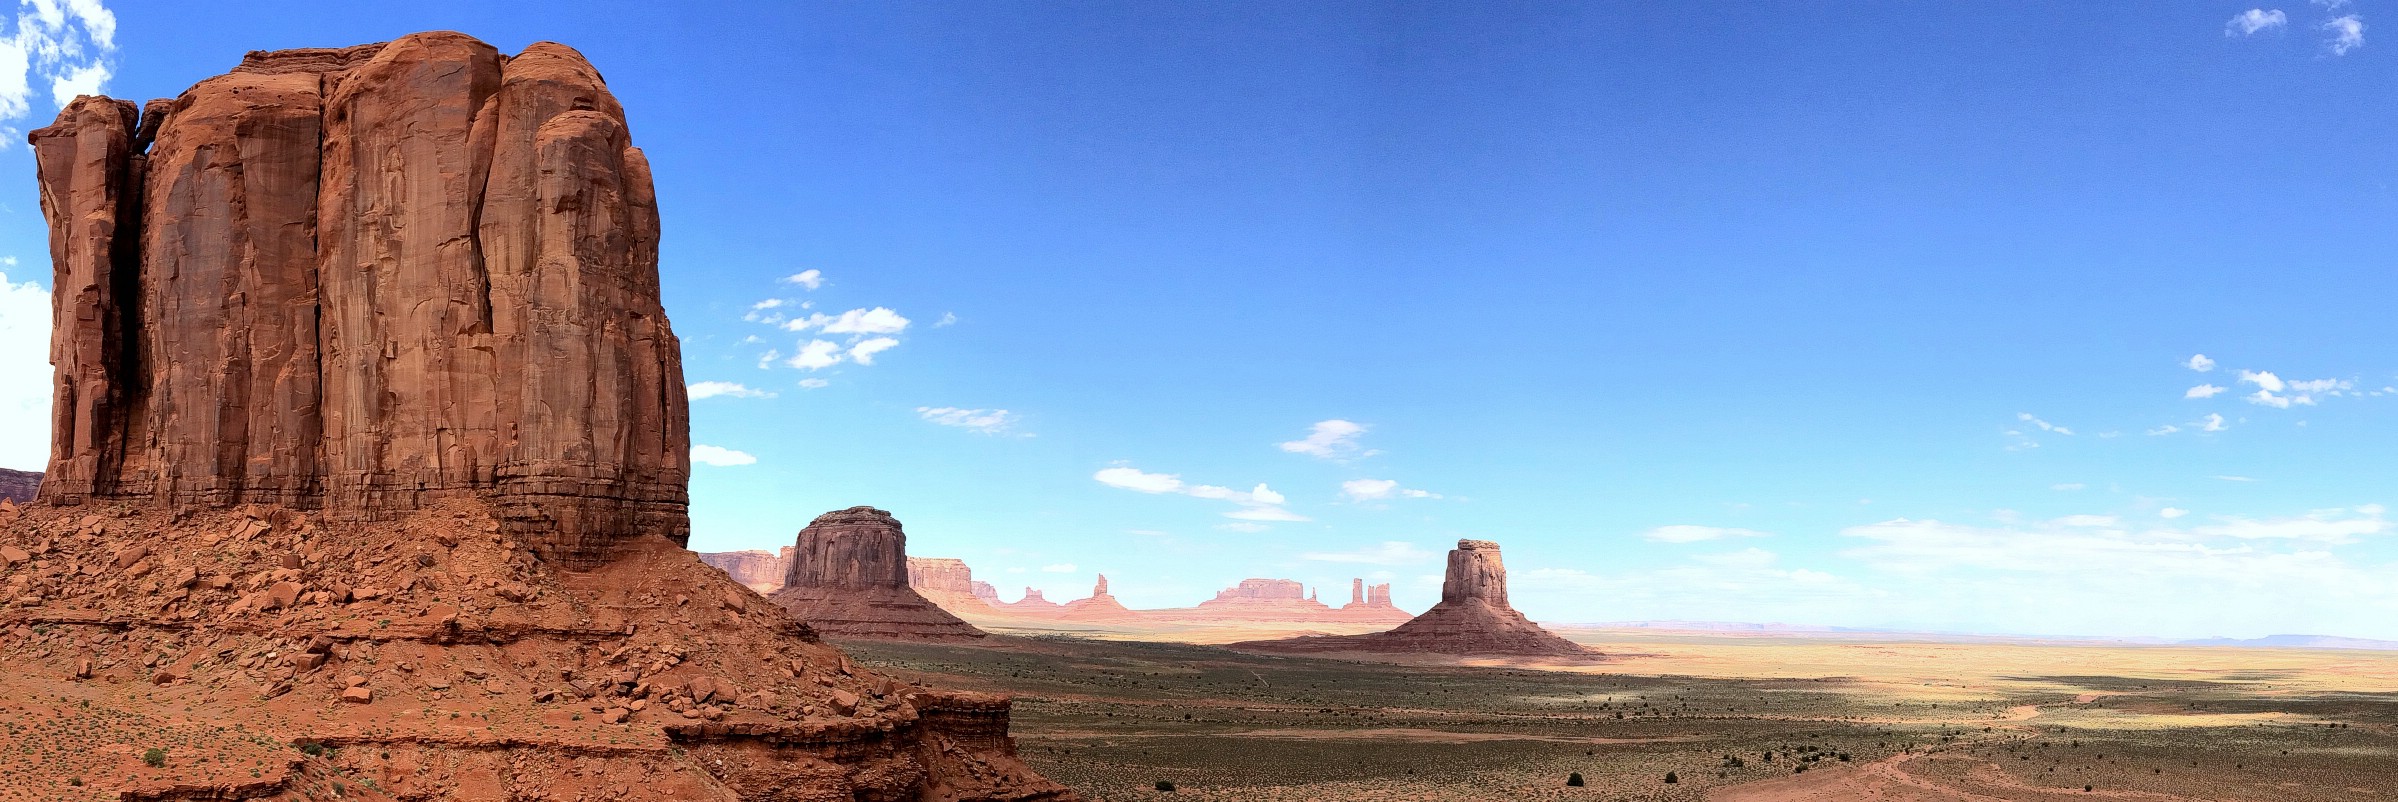 Vista from the North Window Overlook of Monument Valley, Navajo Nation, Arizona. September 11, 2016.